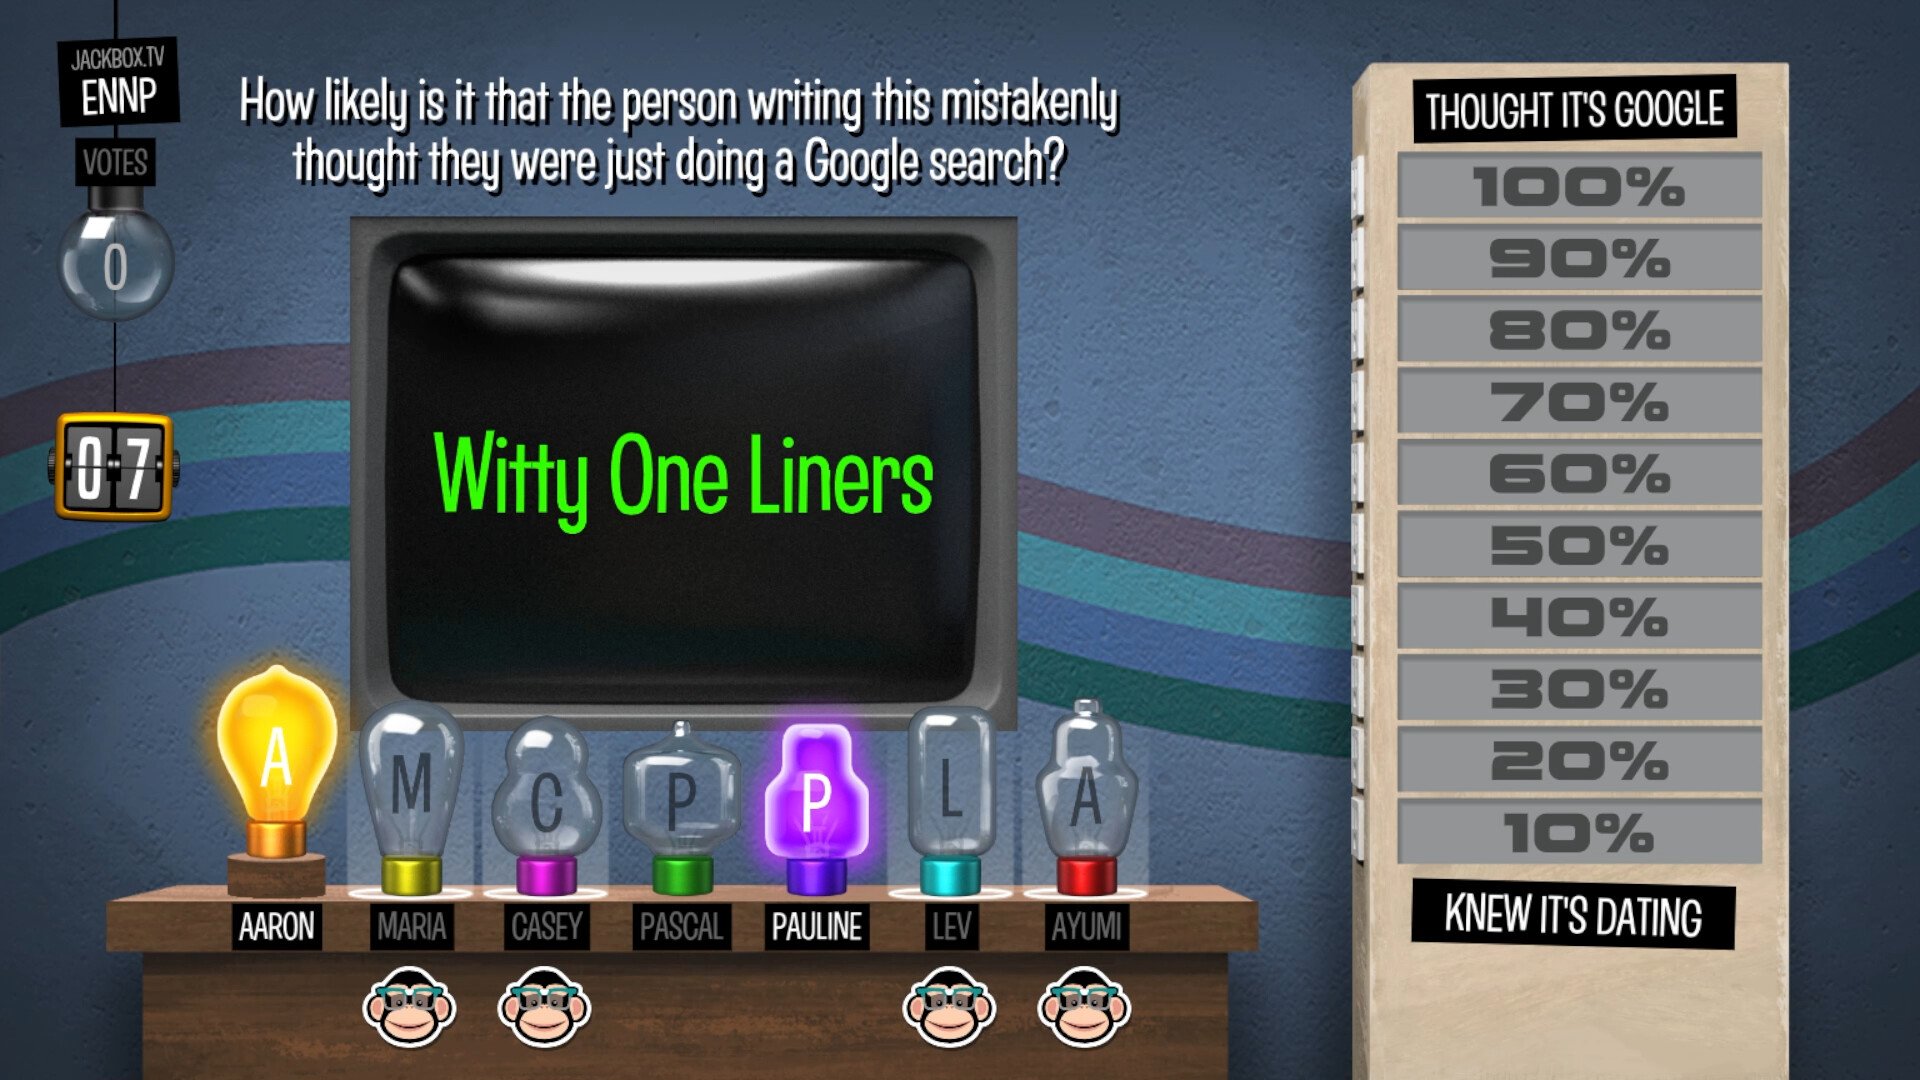 Jackbox Games - 10 Fun Unblocked Games For Player Groups of All Sizes